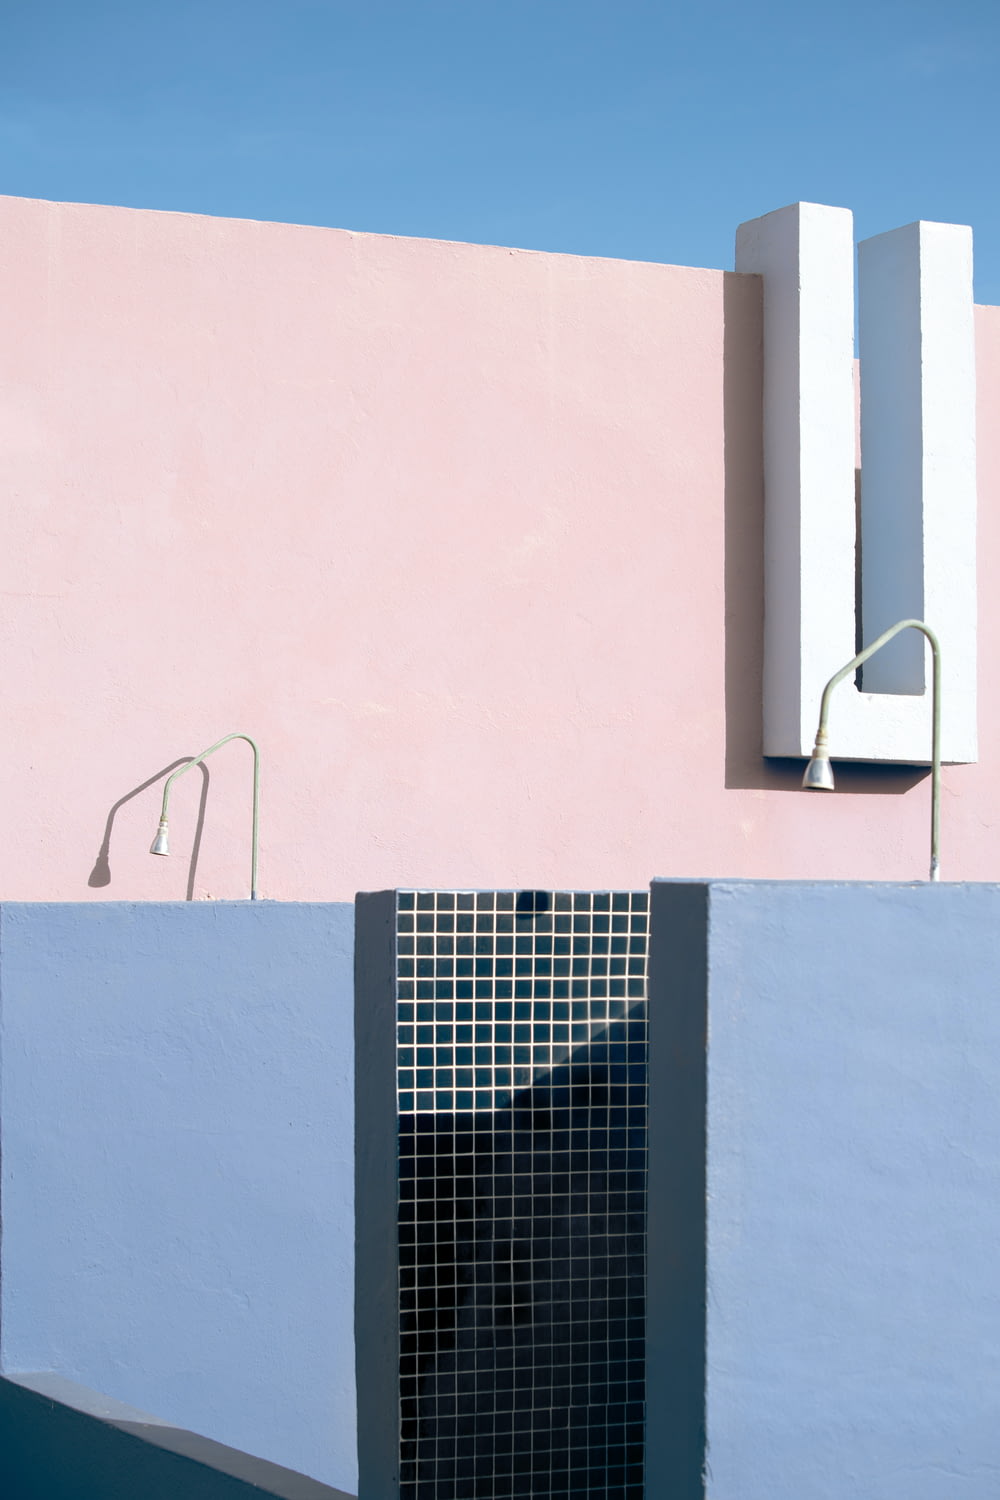 a blue and pink building with a black and white tiled pool